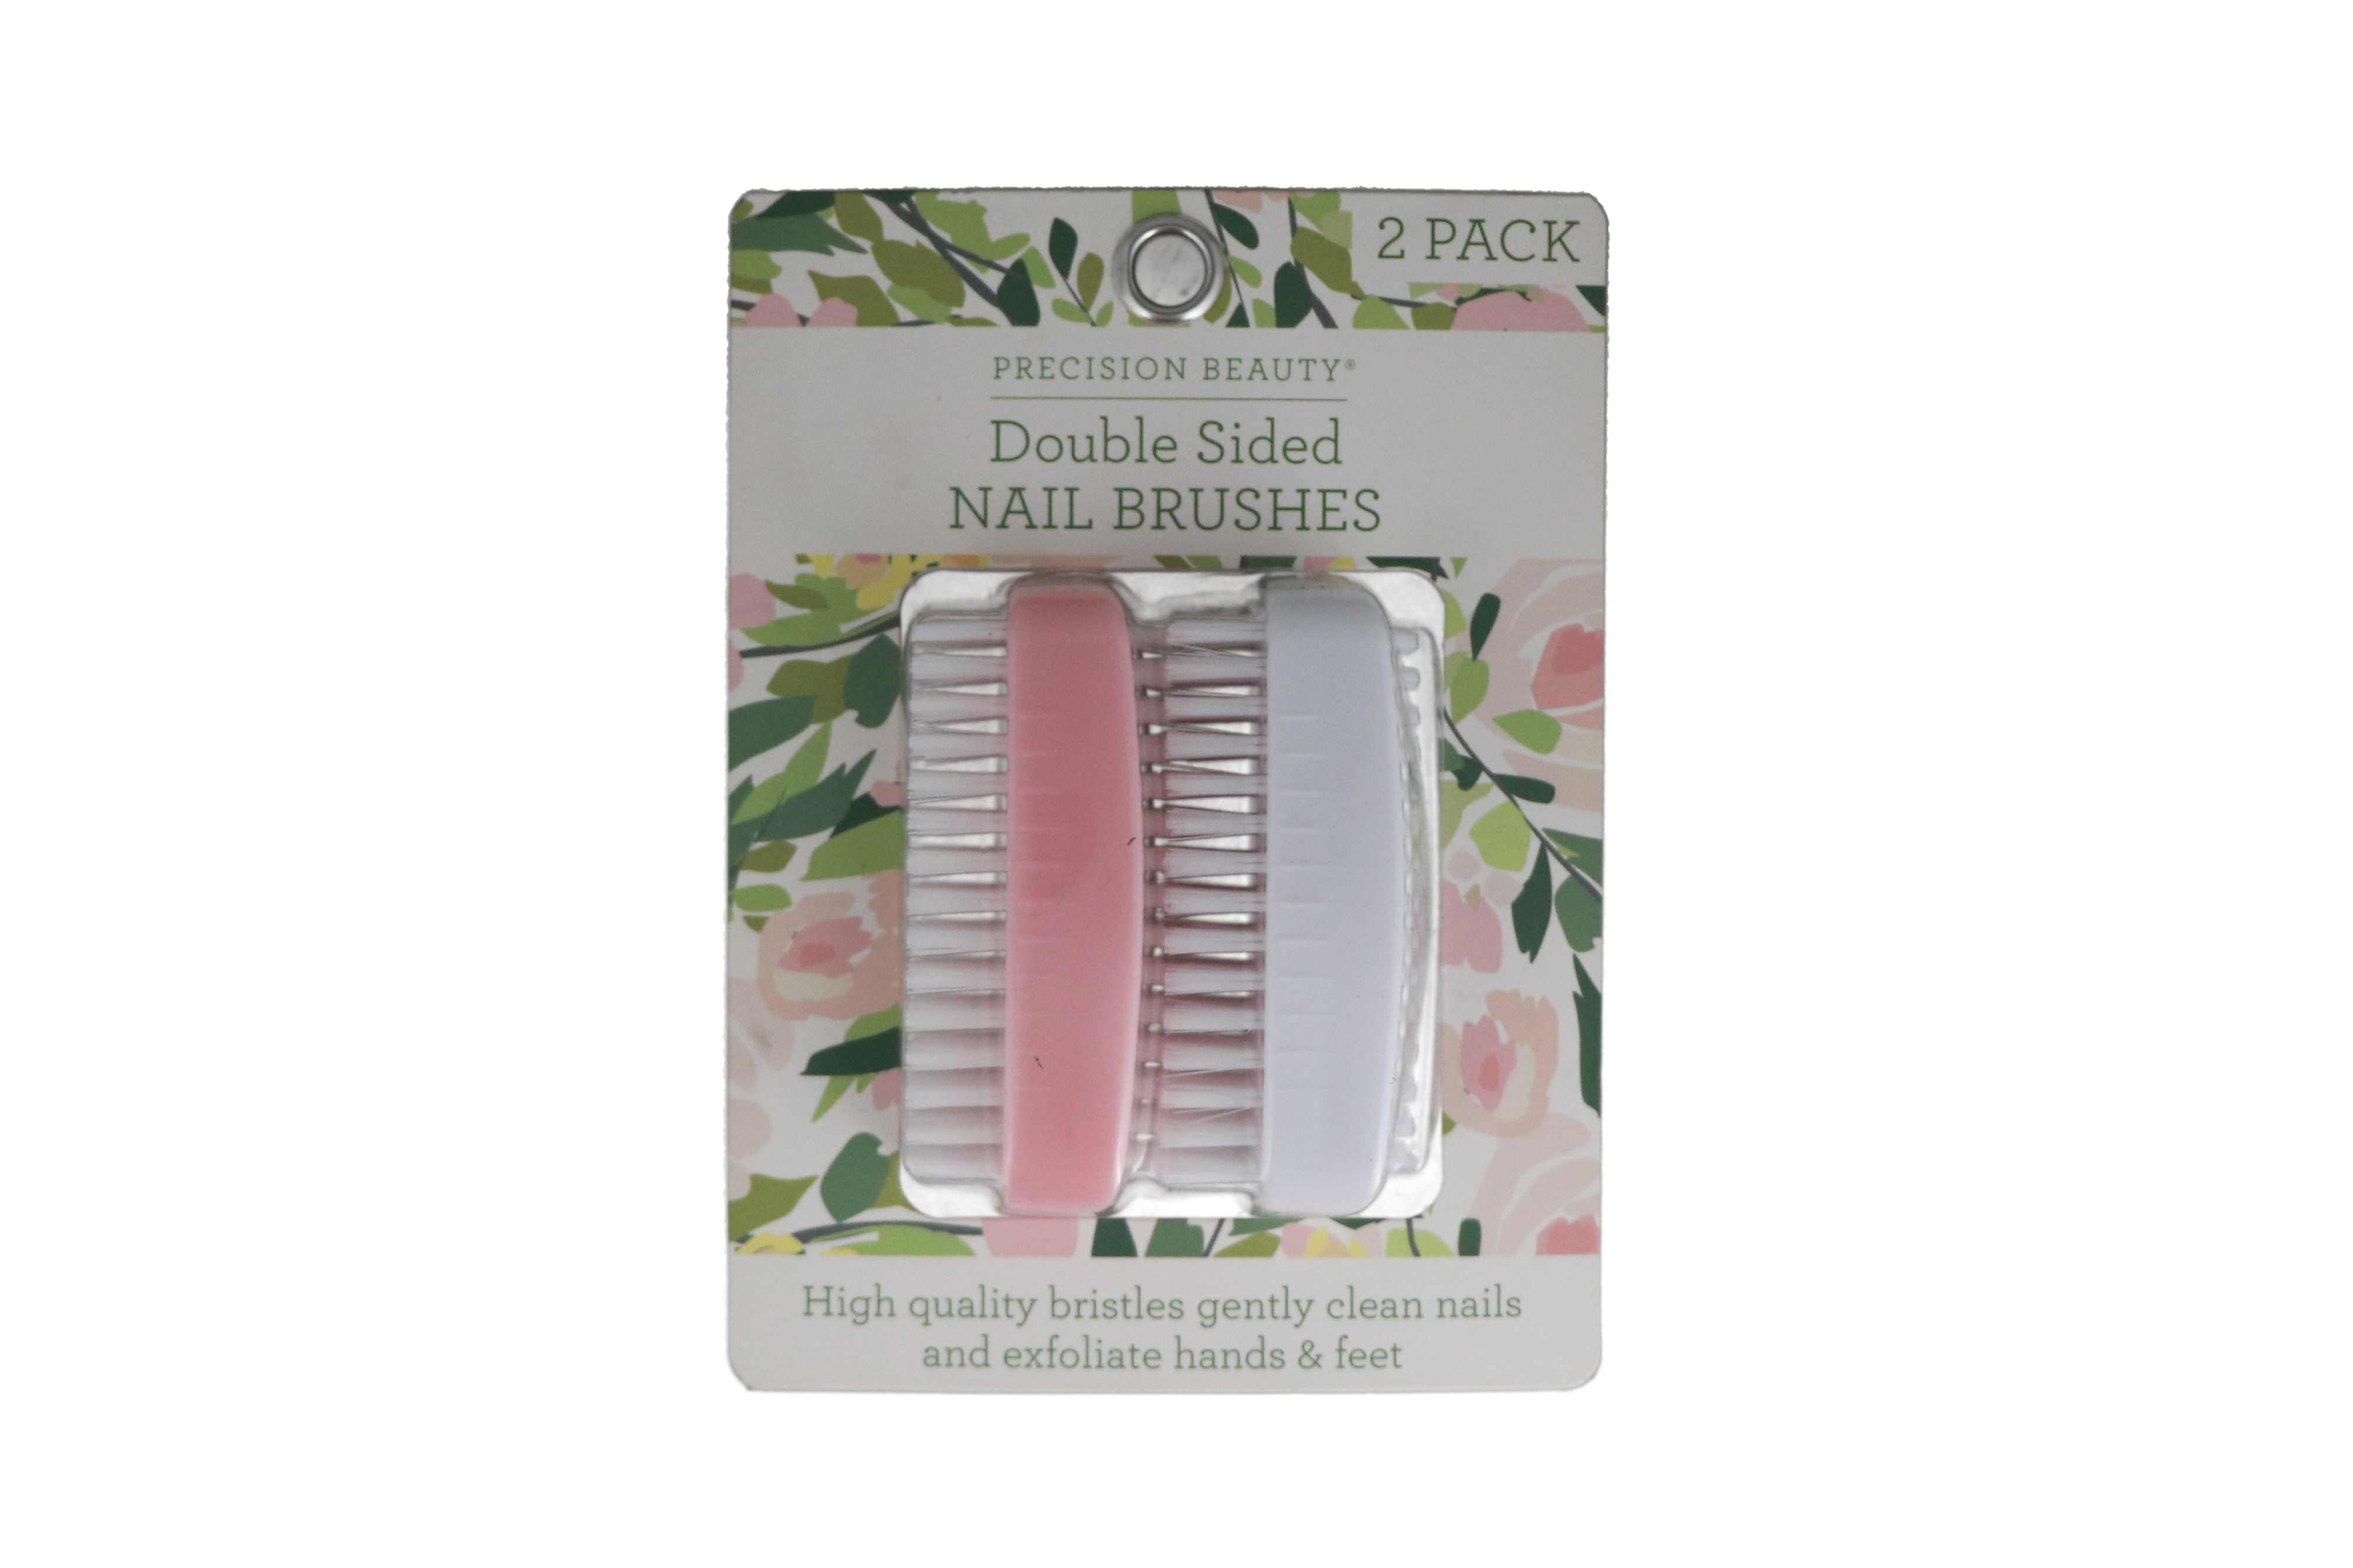 DOUBLE SIDED NAIL BRUSH 2 PACK